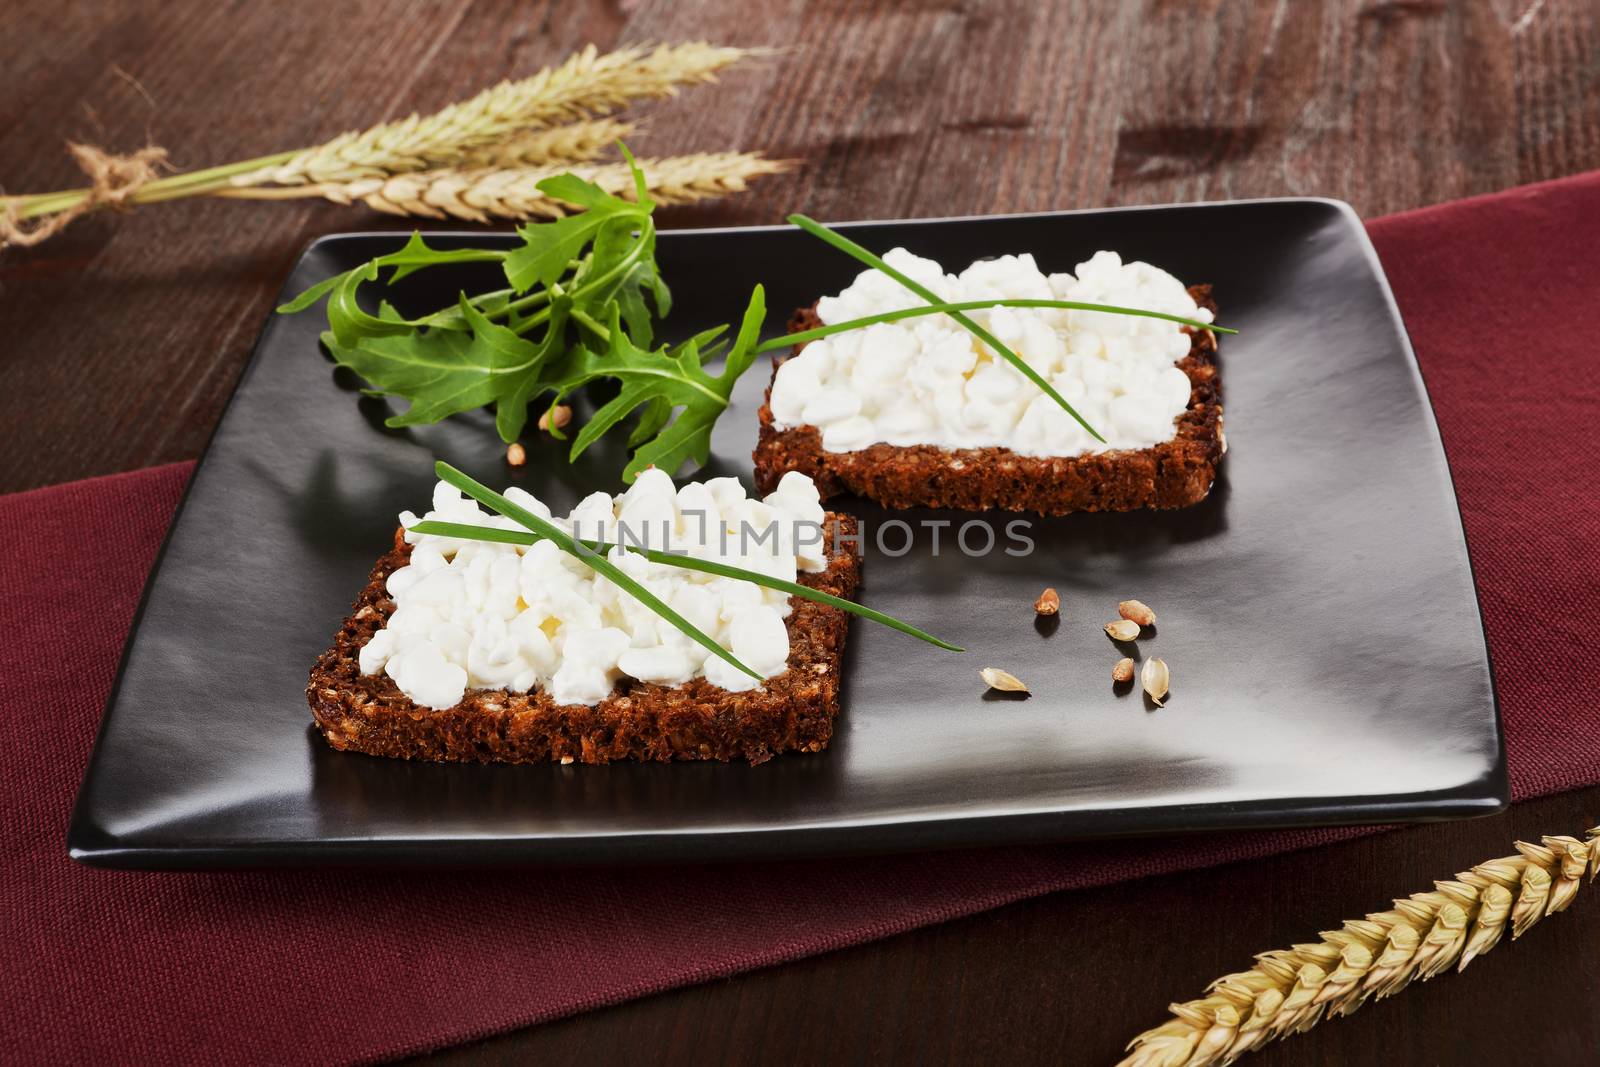 Two slices on black whole wheat bread with cottage cheese and fresh chive and arugula on black plate. Healhty eating background.